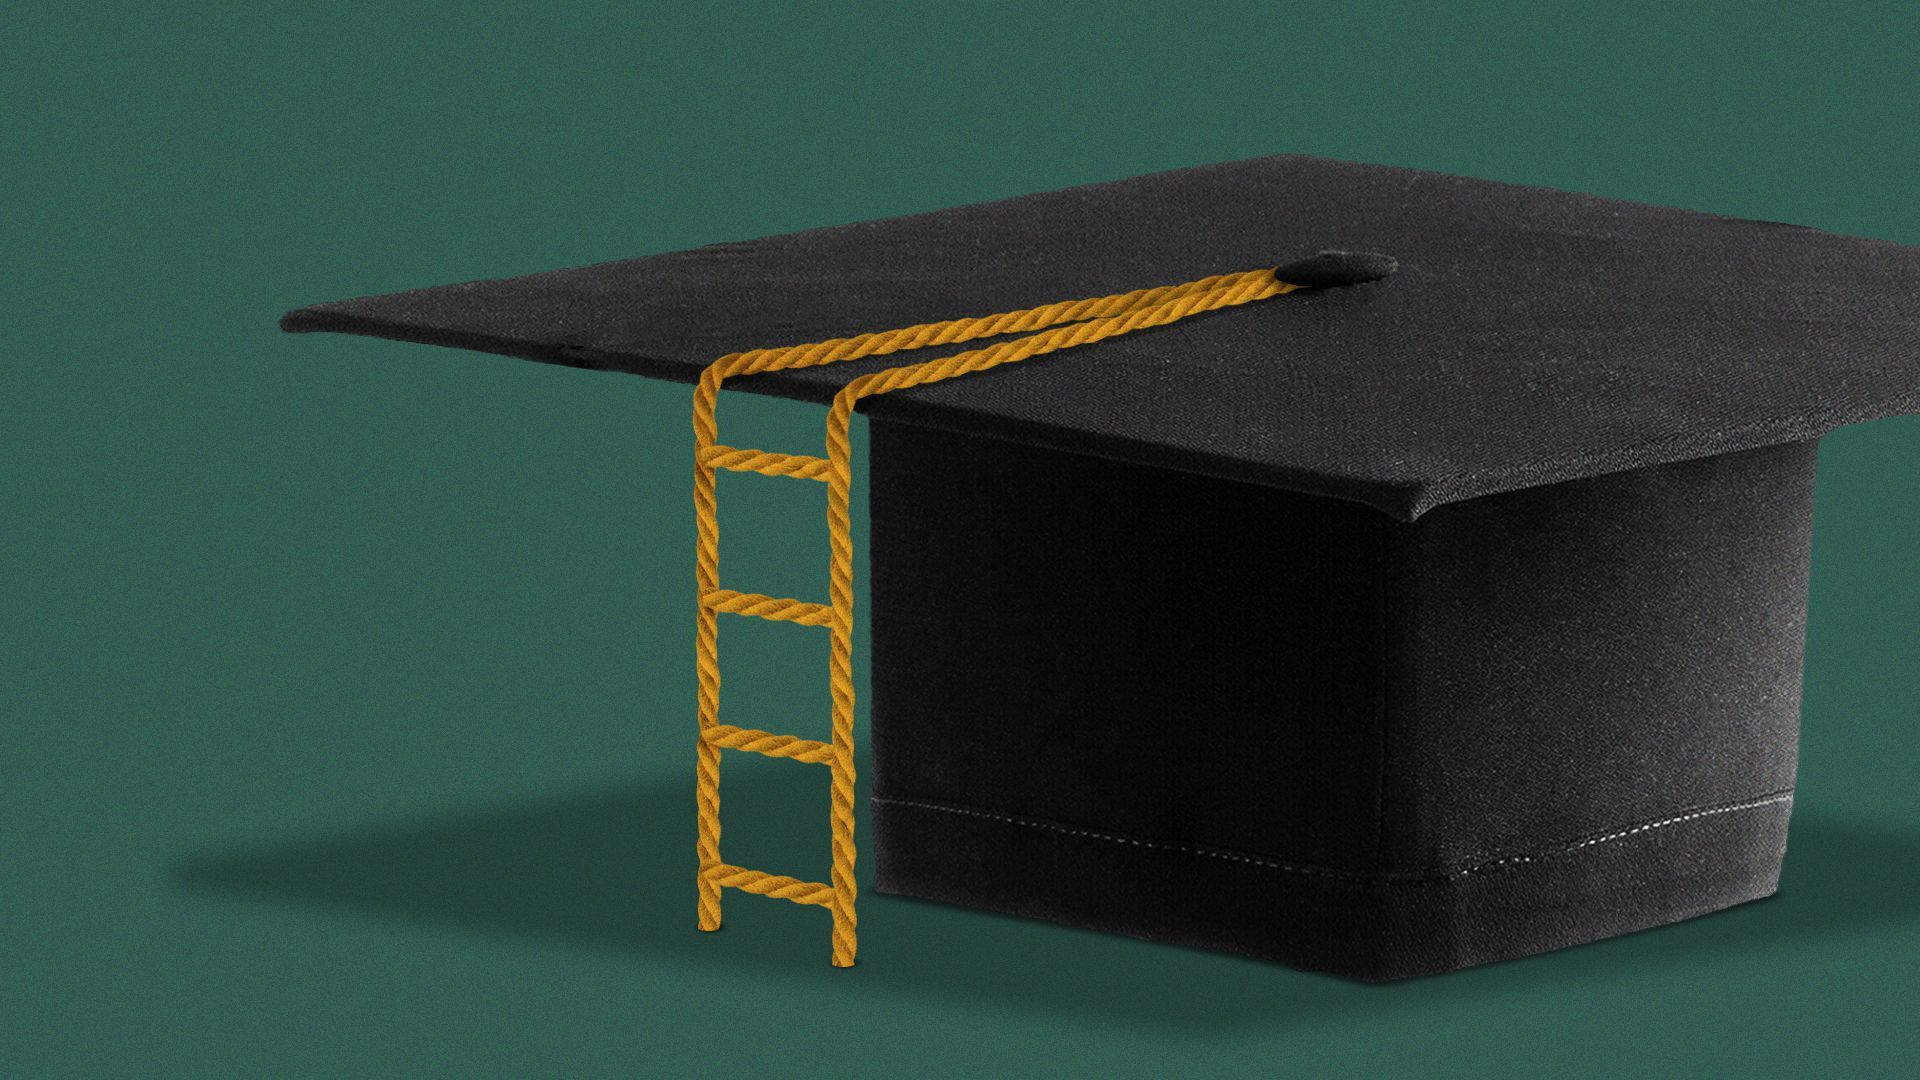 Illustration of a graduation cap but the tassel is a ladder.